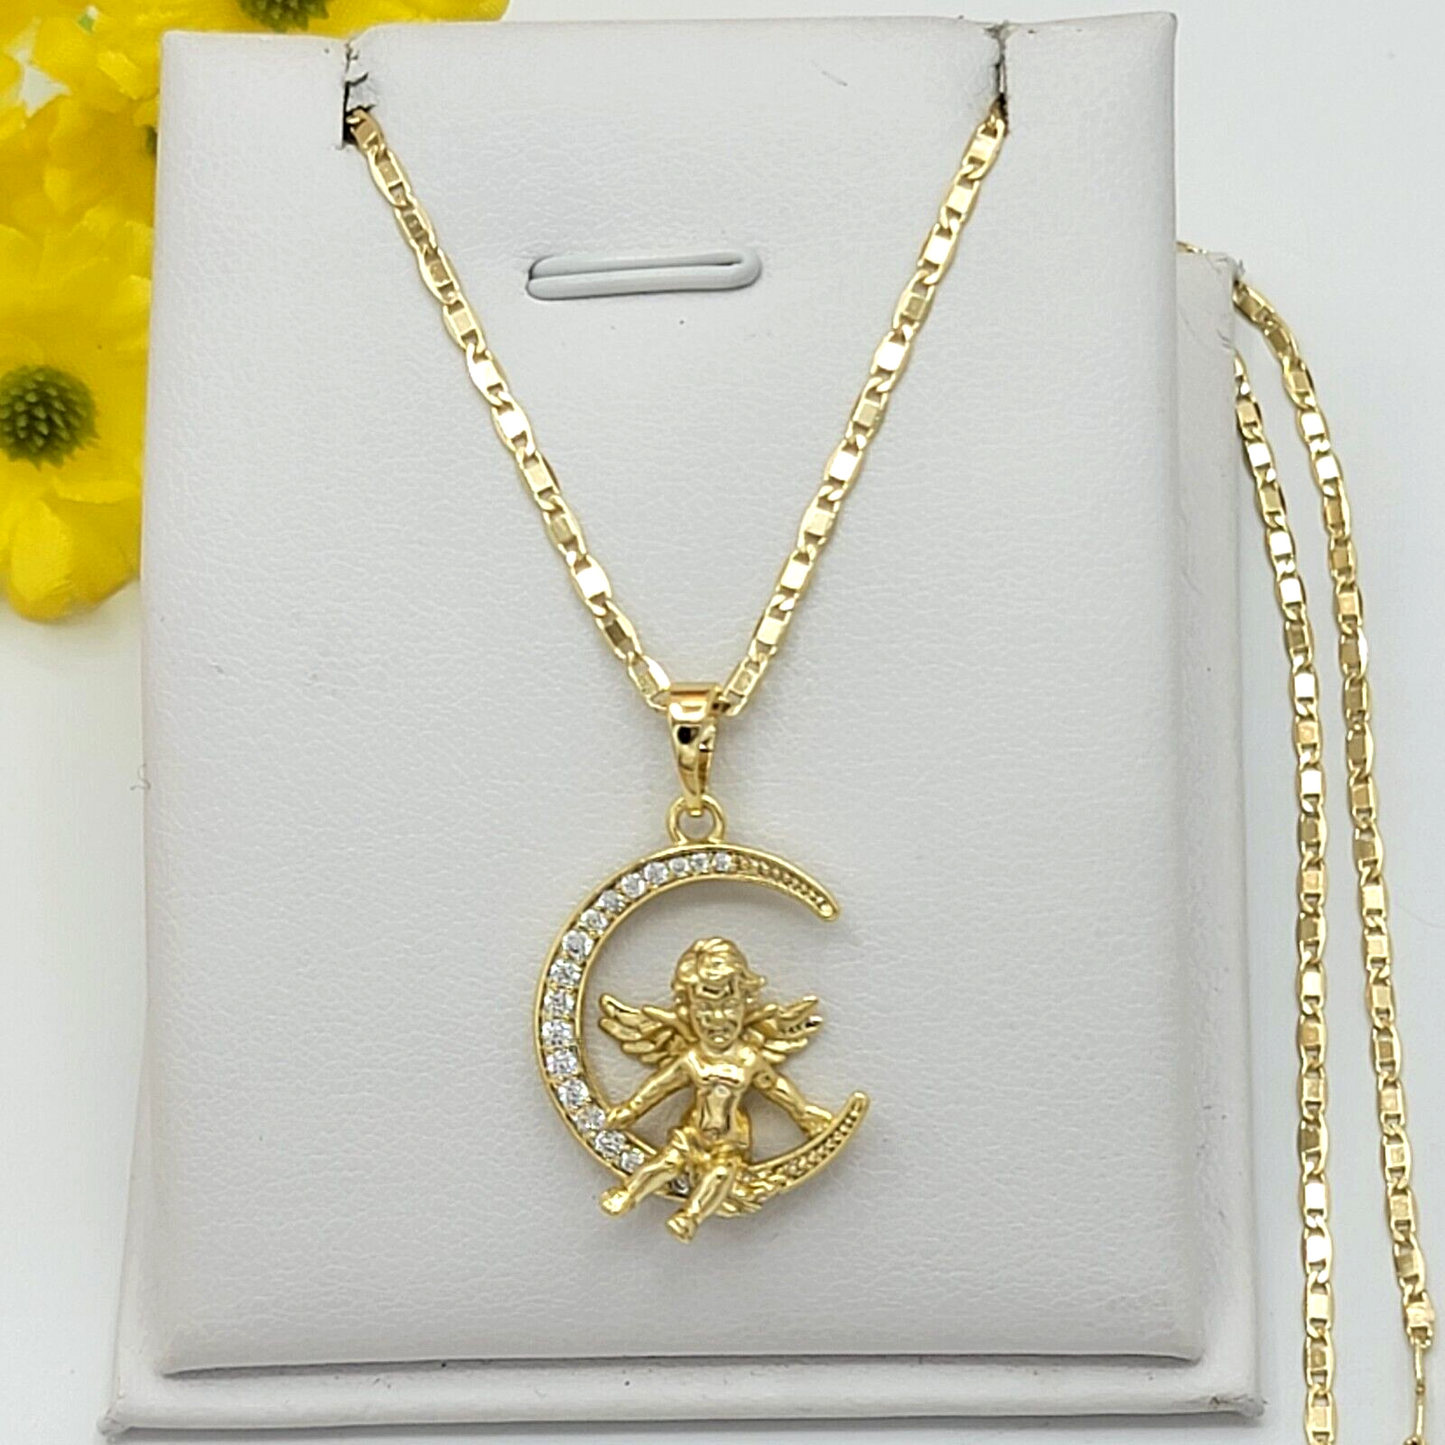 Necklaces - 14K Gold Plated. My Guardian Angel Moon Pendant & Chain.